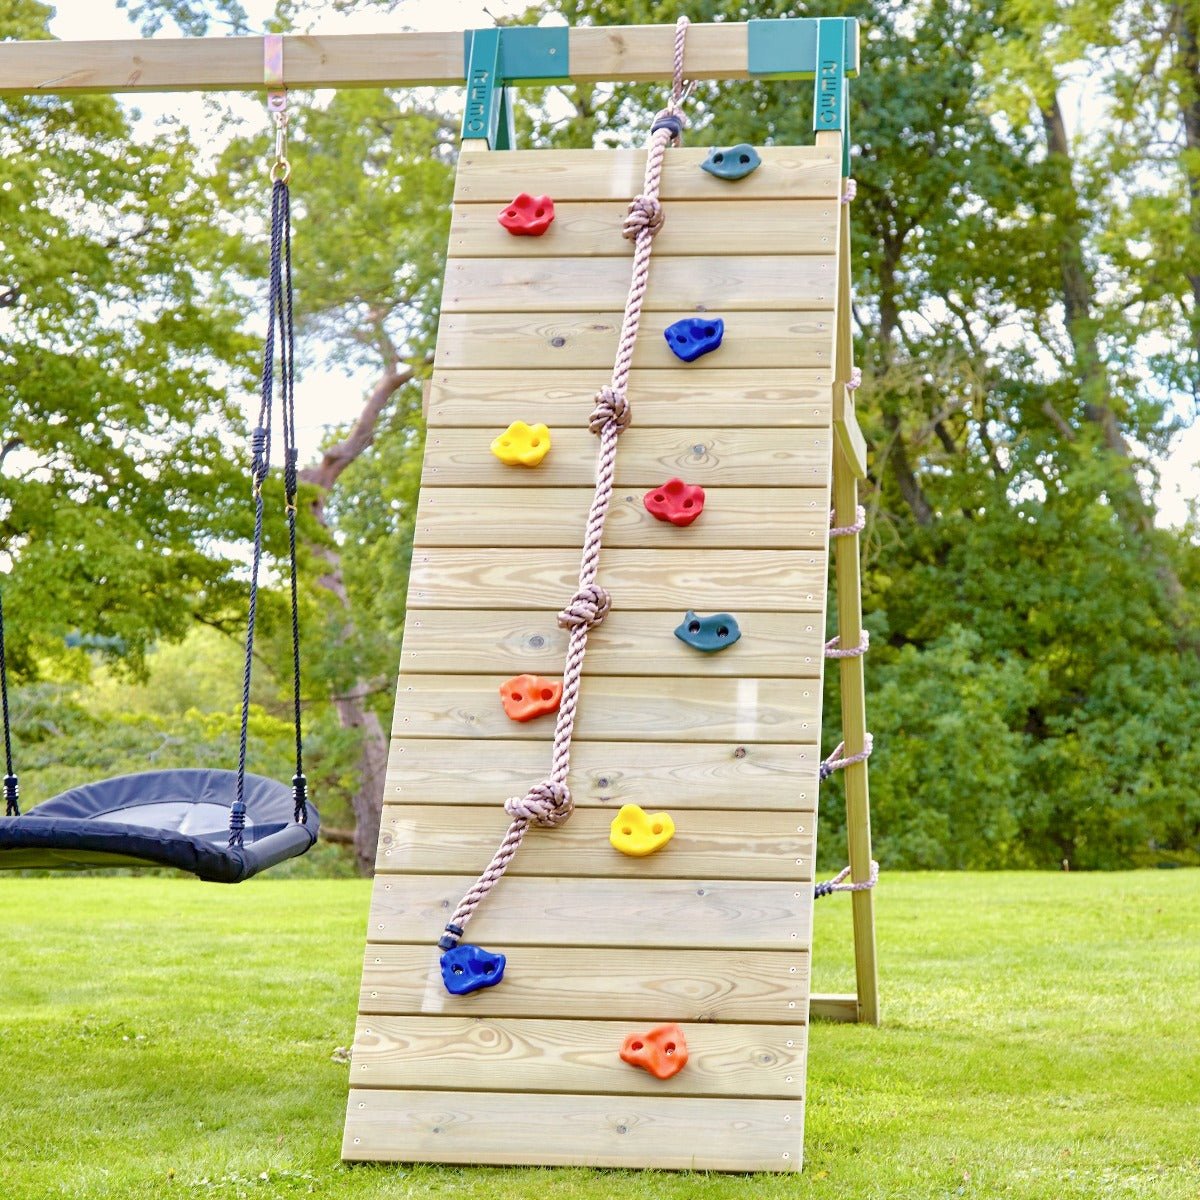 Rebo Challenge Wooden Climbing Frame with Swings, Slide and Up & over Climbing wall - Ferris